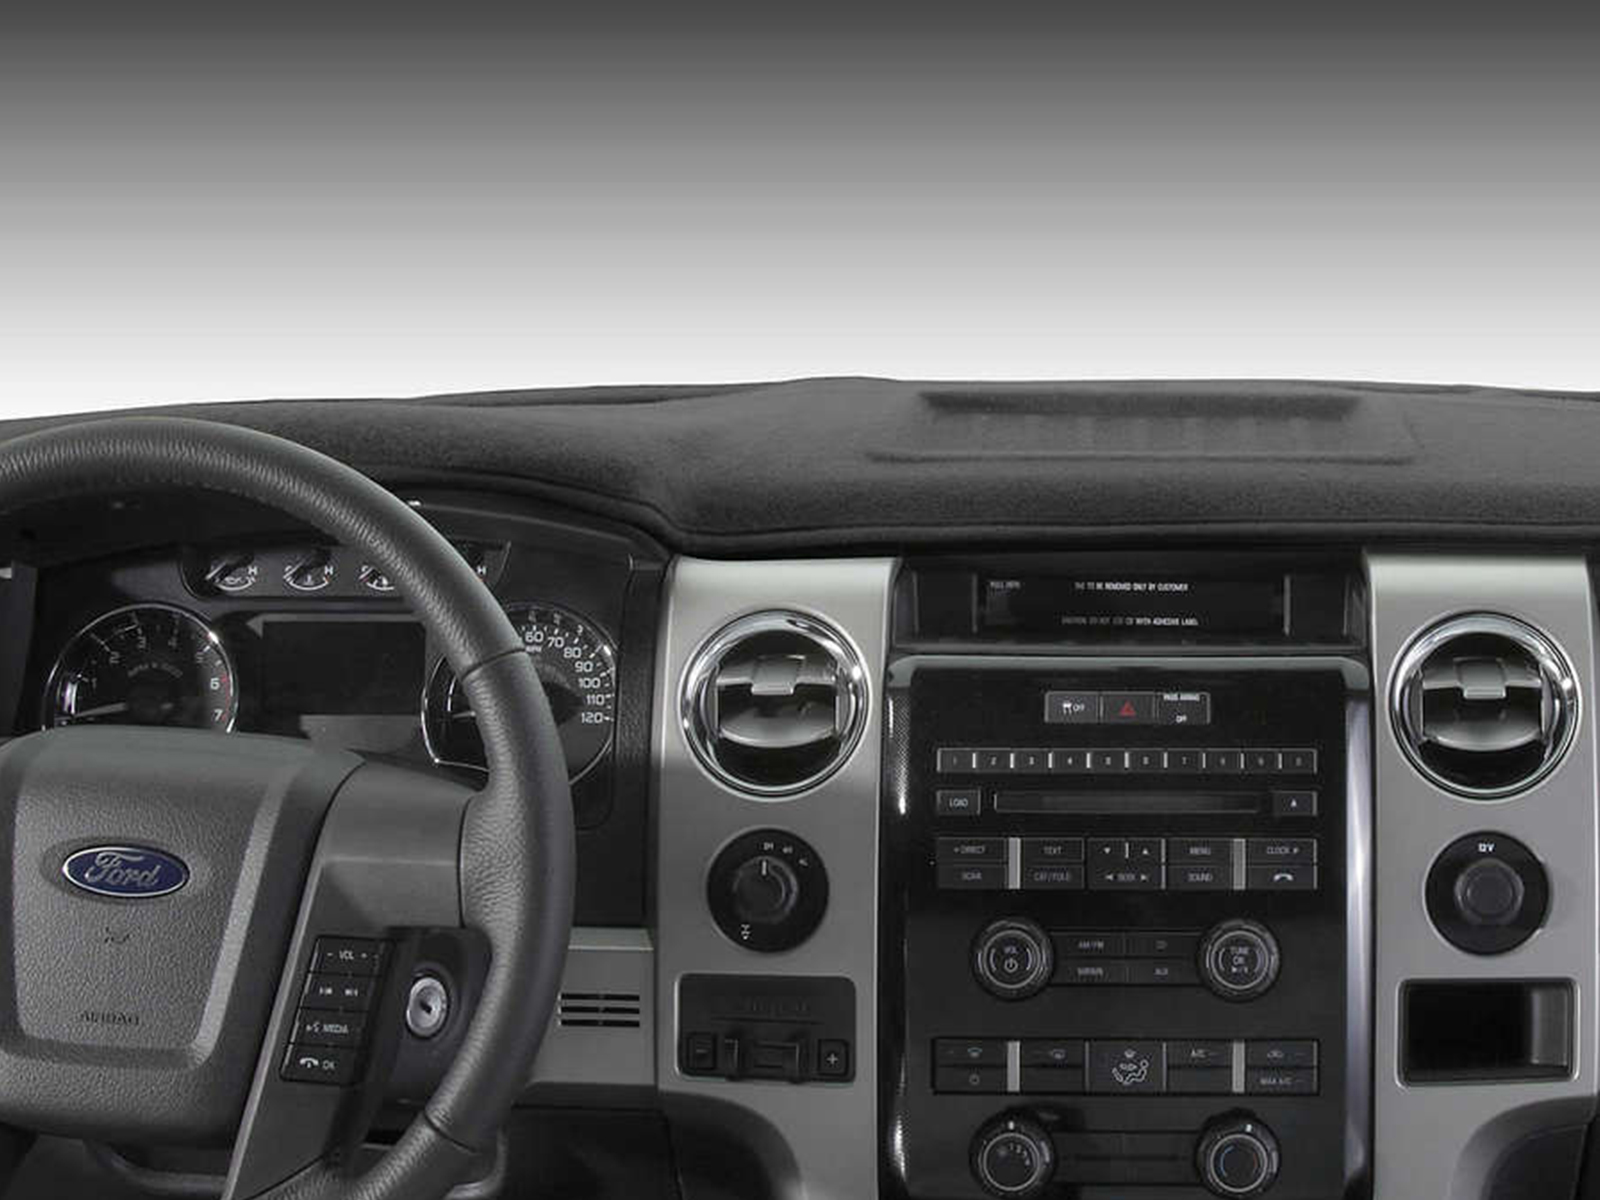 1992 Ford F250 Dash Covers RealTruck